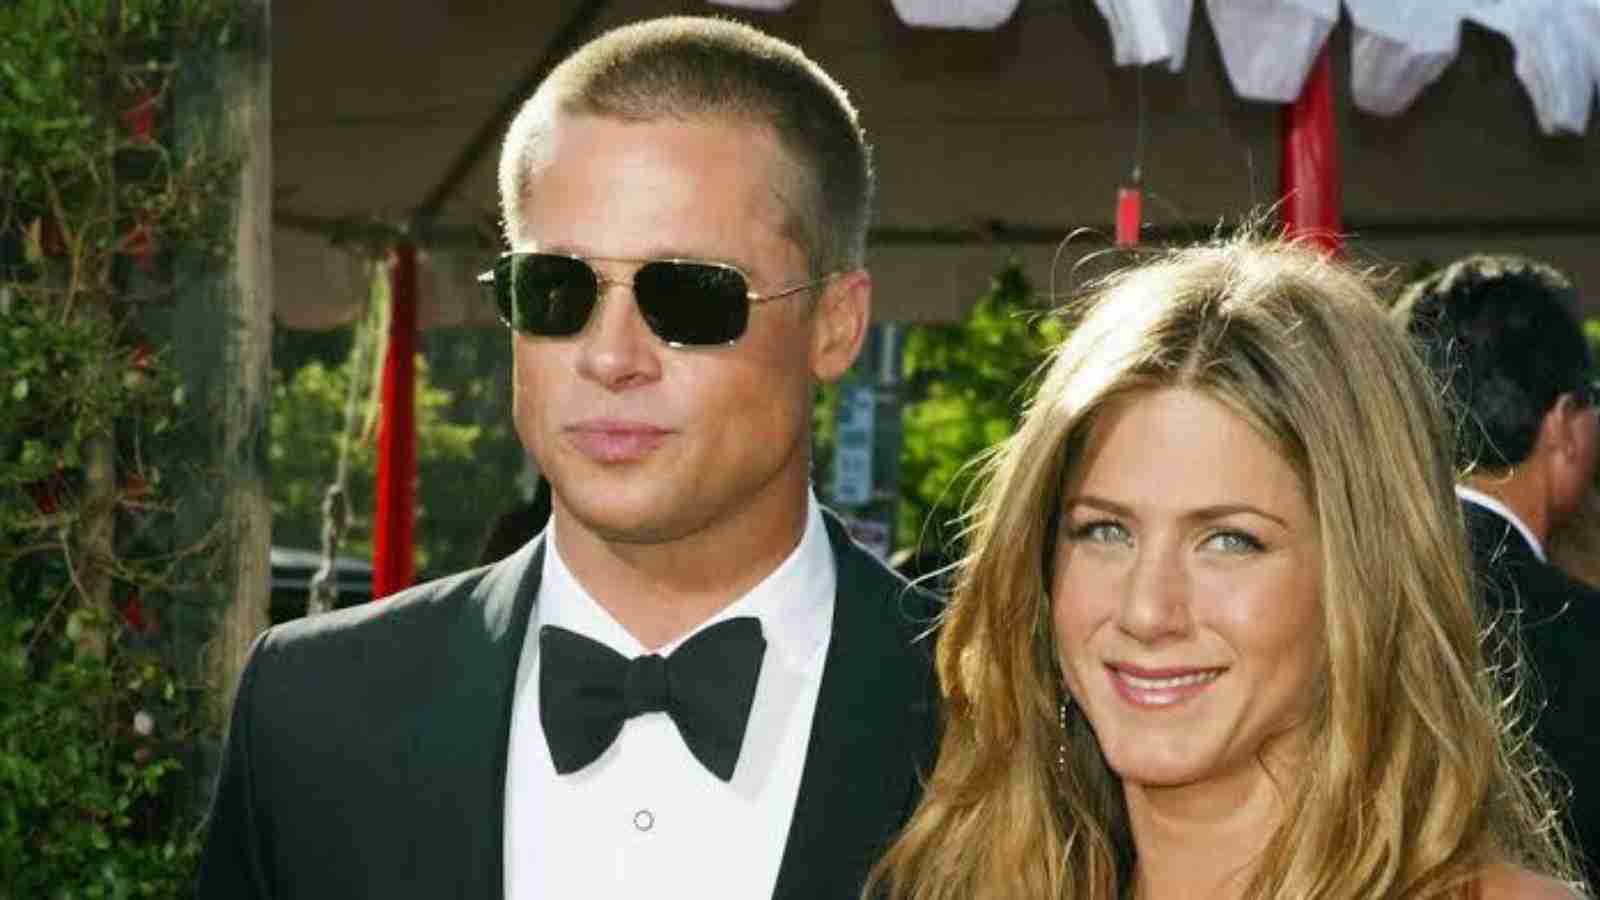 Jennifer Aniston and the Fight Club Actor were the golden couple of Hollywood